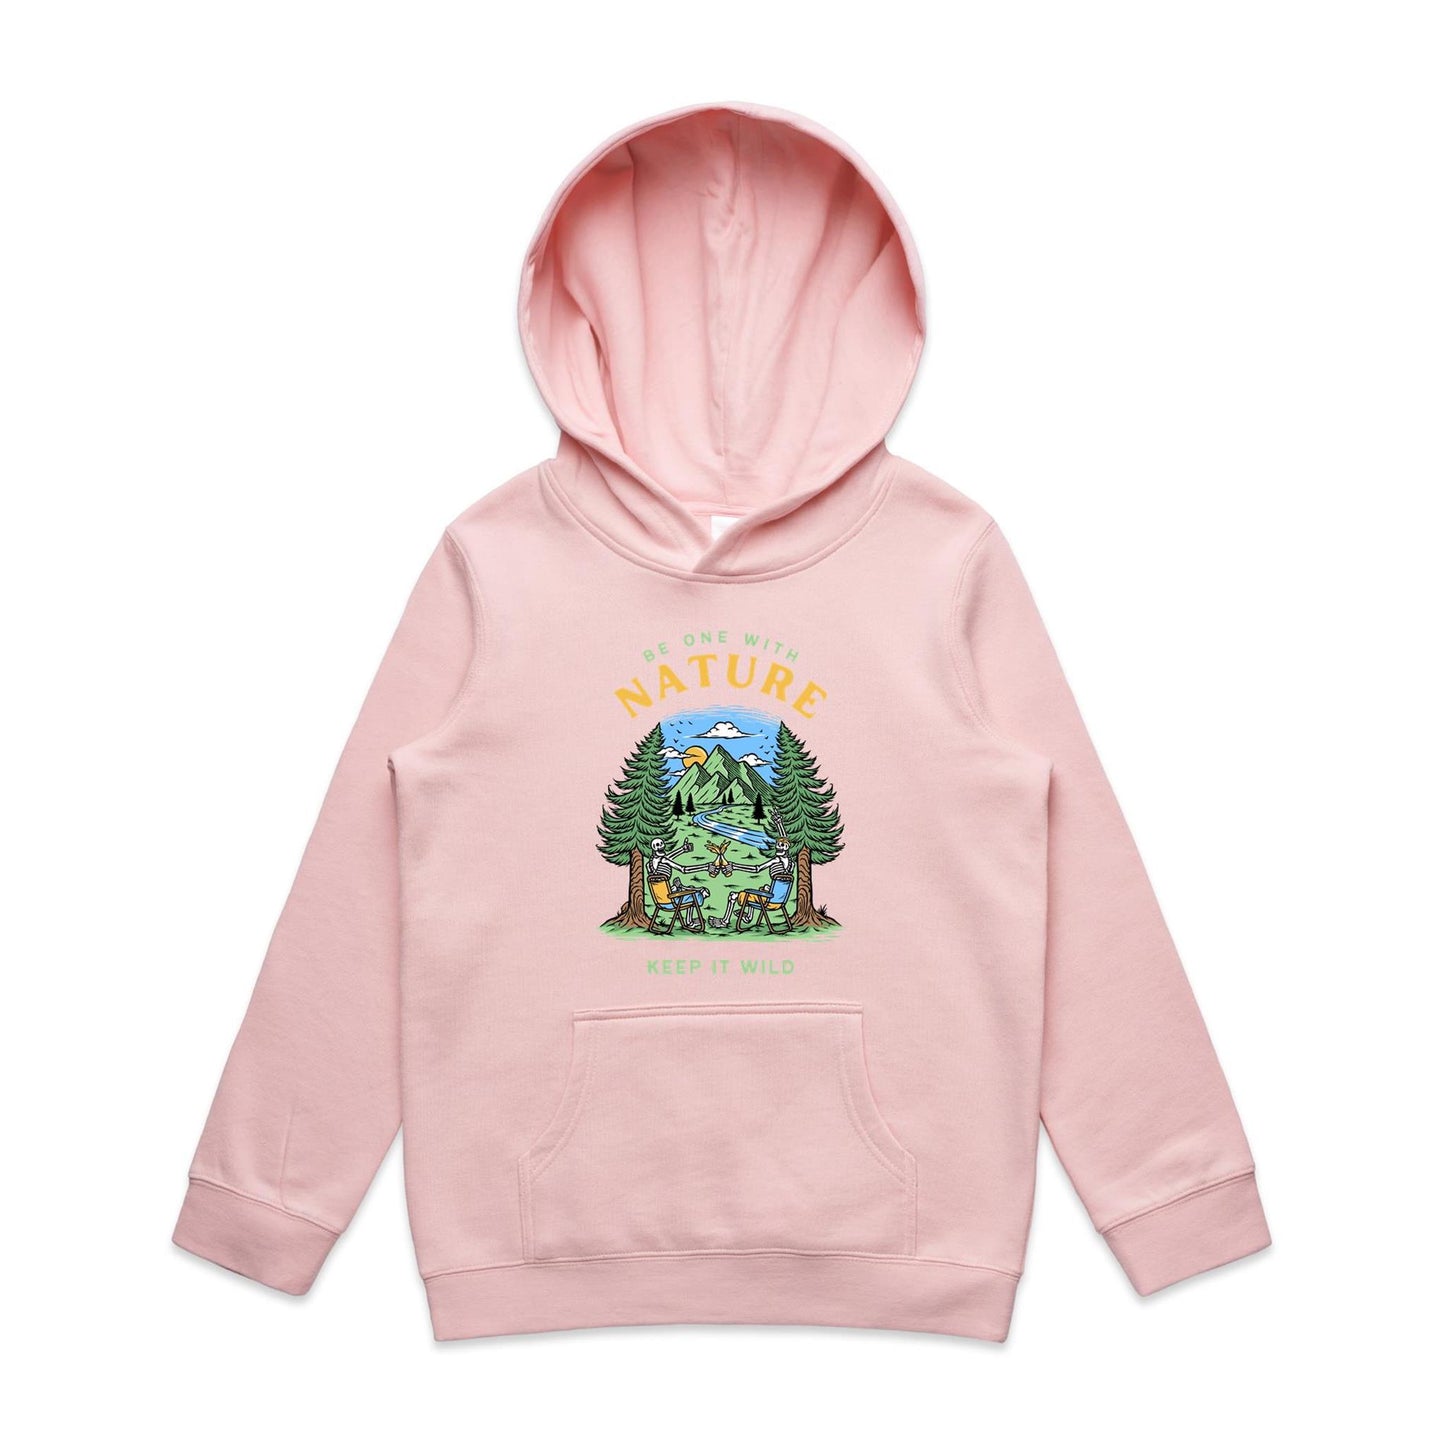 Be One With Nature, Skeleton - Youth Supply Hood Pink Kids Hoodie Environment Summer